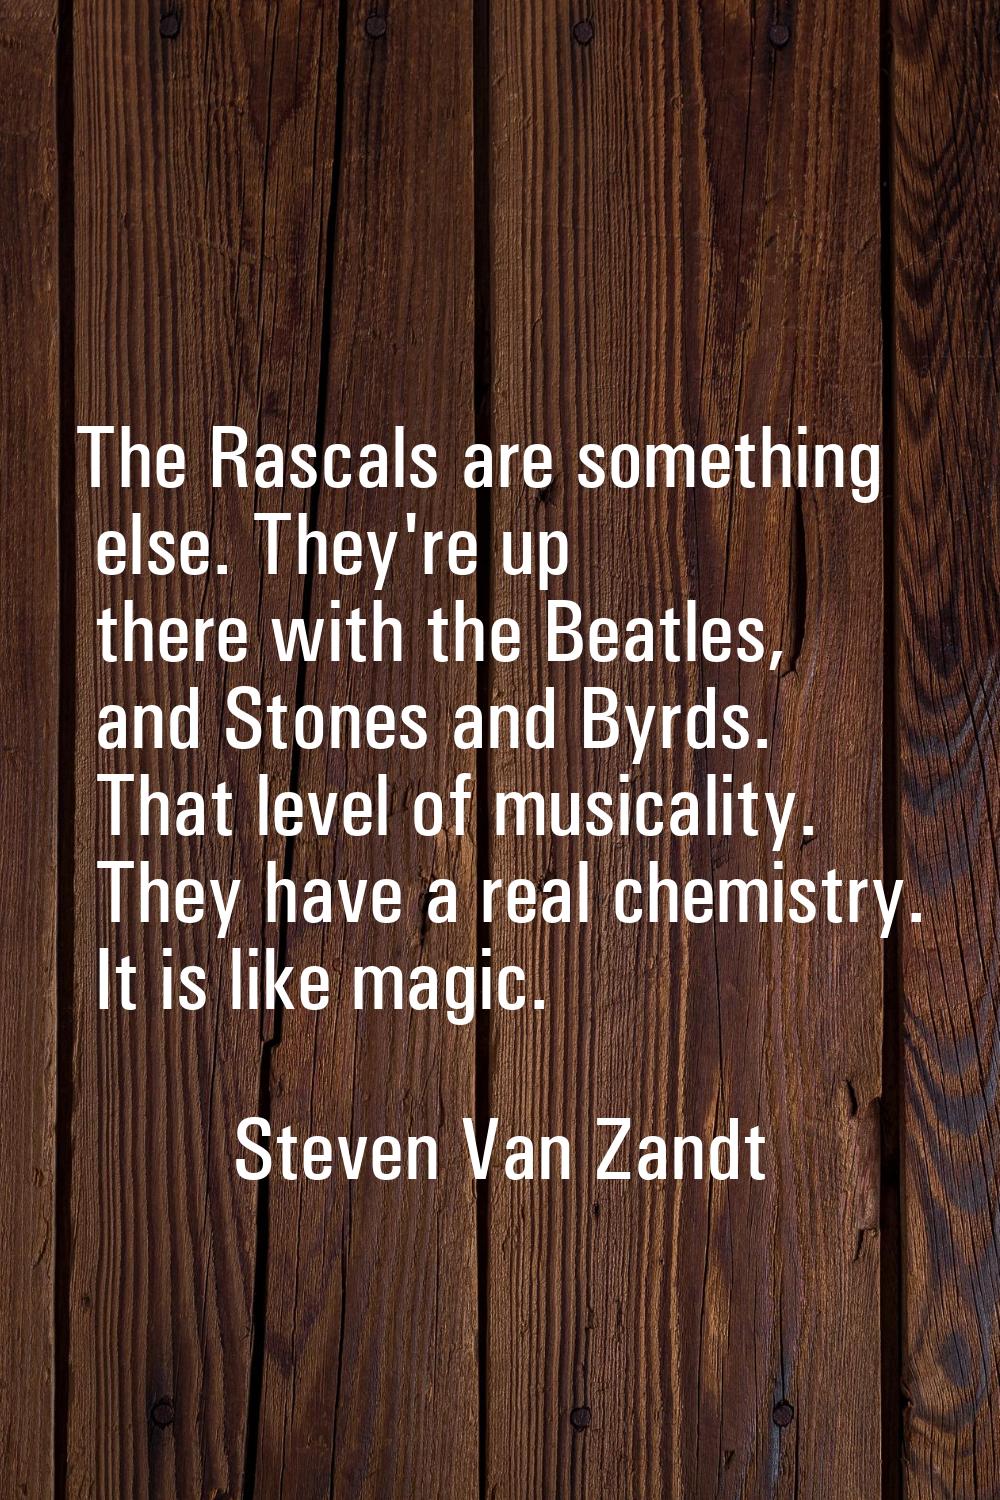 The Rascals are something else. They're up there with the Beatles, and Stones and Byrds. That level